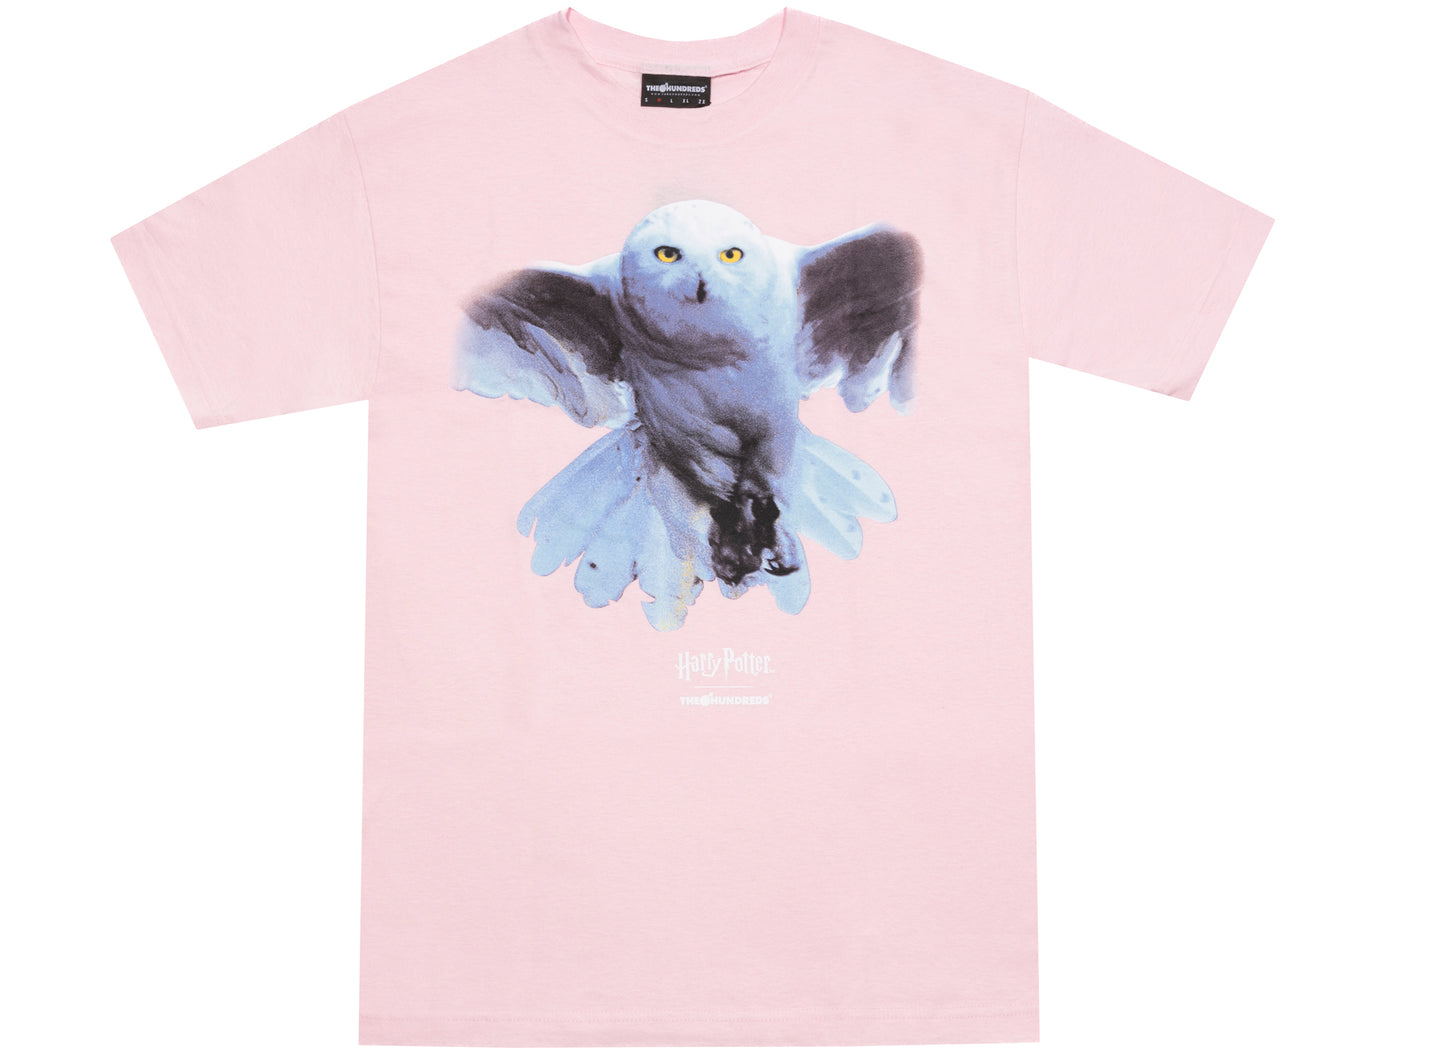 The Hundreds x Harry Potter Hedwig Tee in Pink